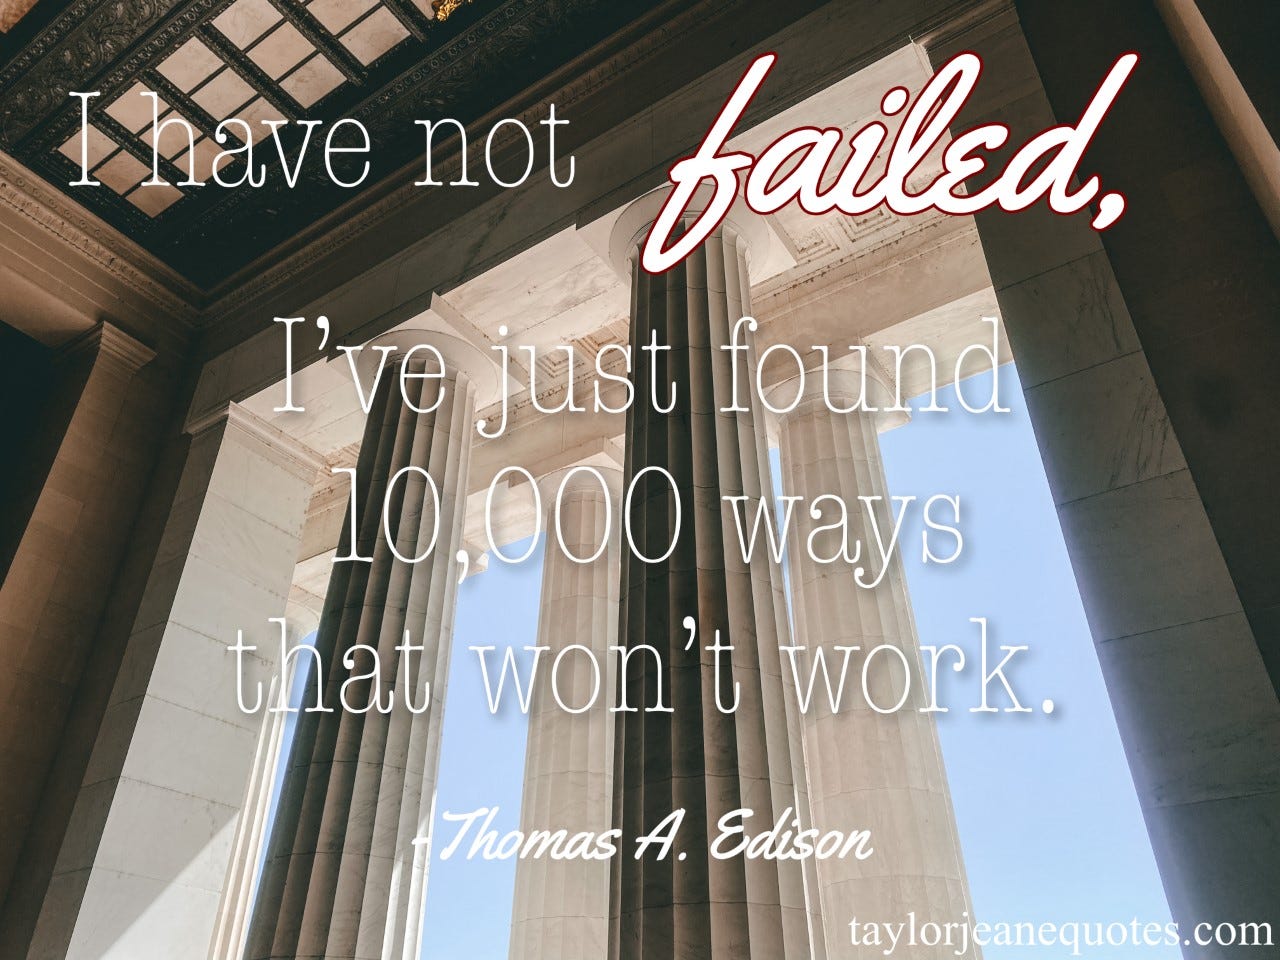 taylor jeane quotes, quote of the day, quote of the day email subscription, thomas a edison, thomas edison, thomas edison quotes, thomas a edison quotes, failure quotes, dealing with failure quotes, motivational quotes, inspirational quotes, uplifting quotes, life quotes